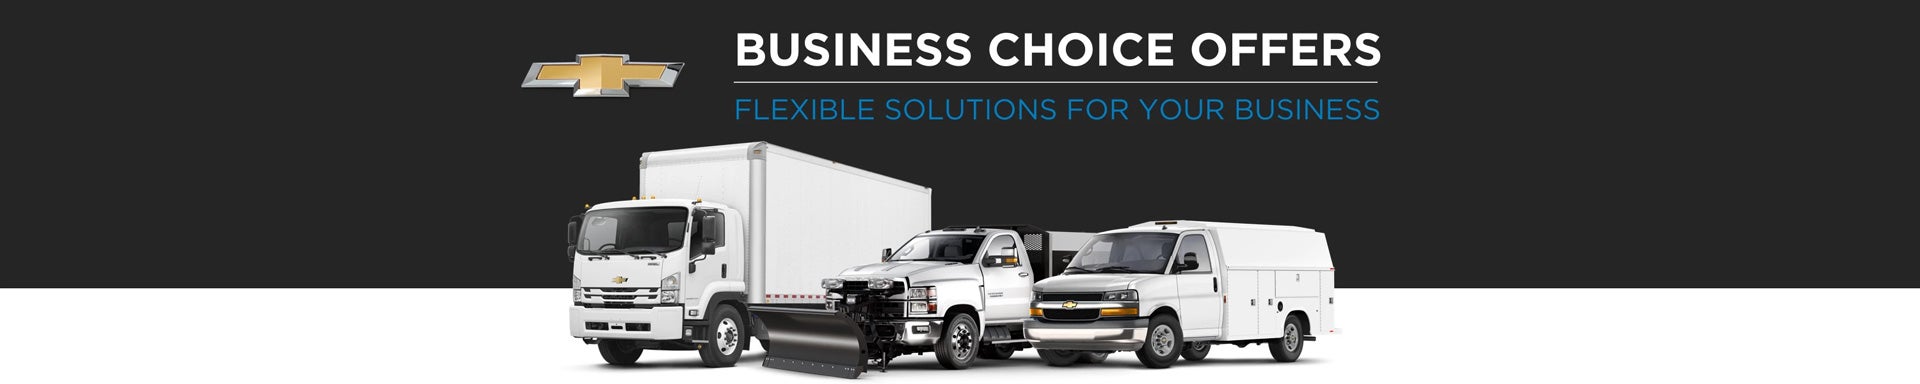 Chevrolet Business Choice Offers - Flexible Solutions for your Business - Sir Walter Chevrolet in Raleigh NC